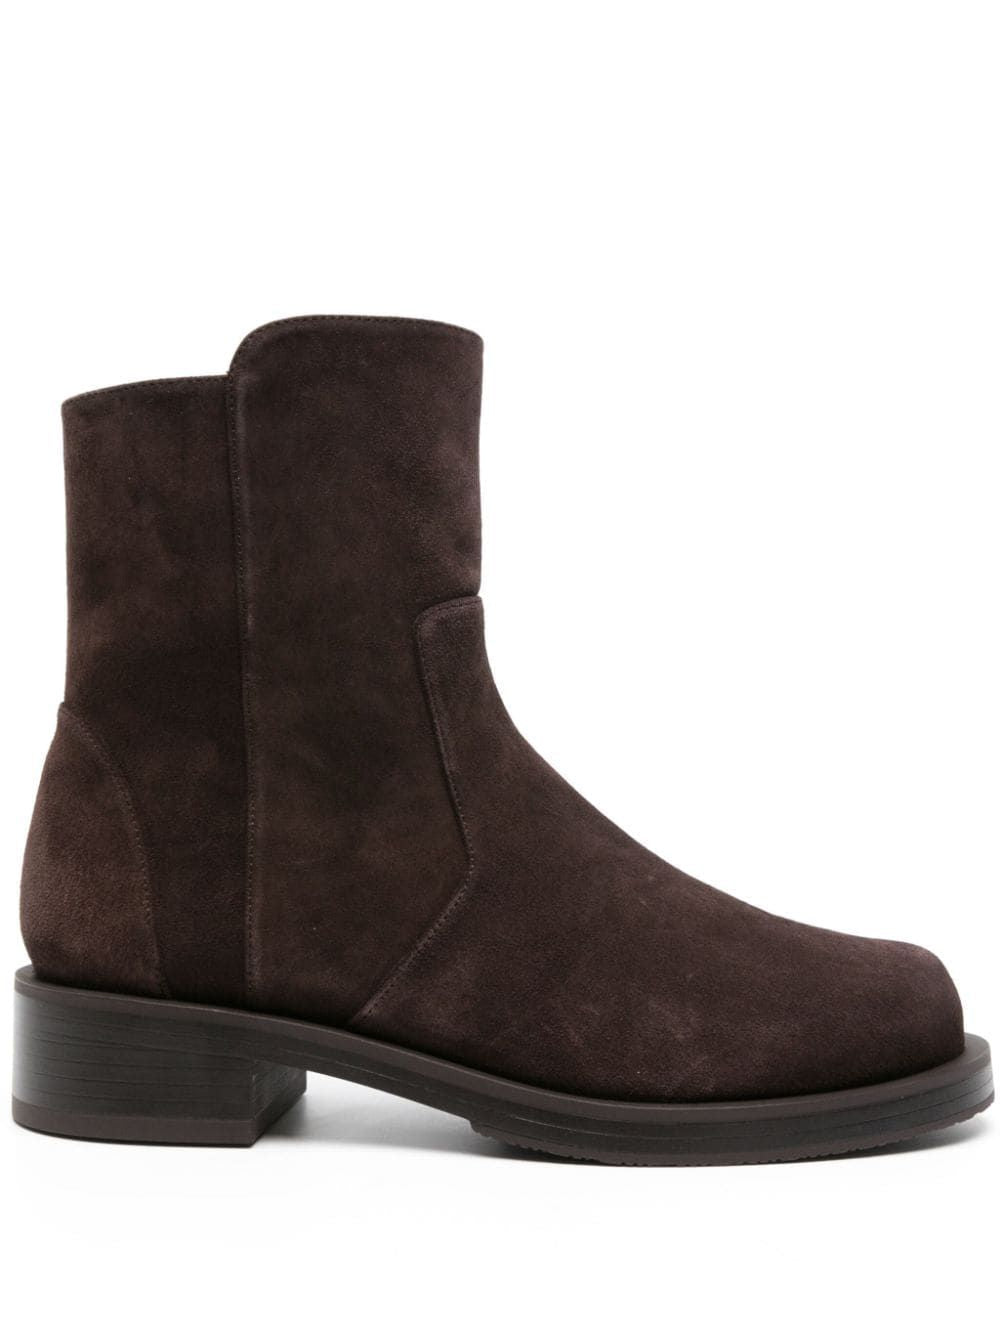 STUART WEITZMAN Stylish Brown Leather Boots for Women - Fall/Winter 2023 Collection